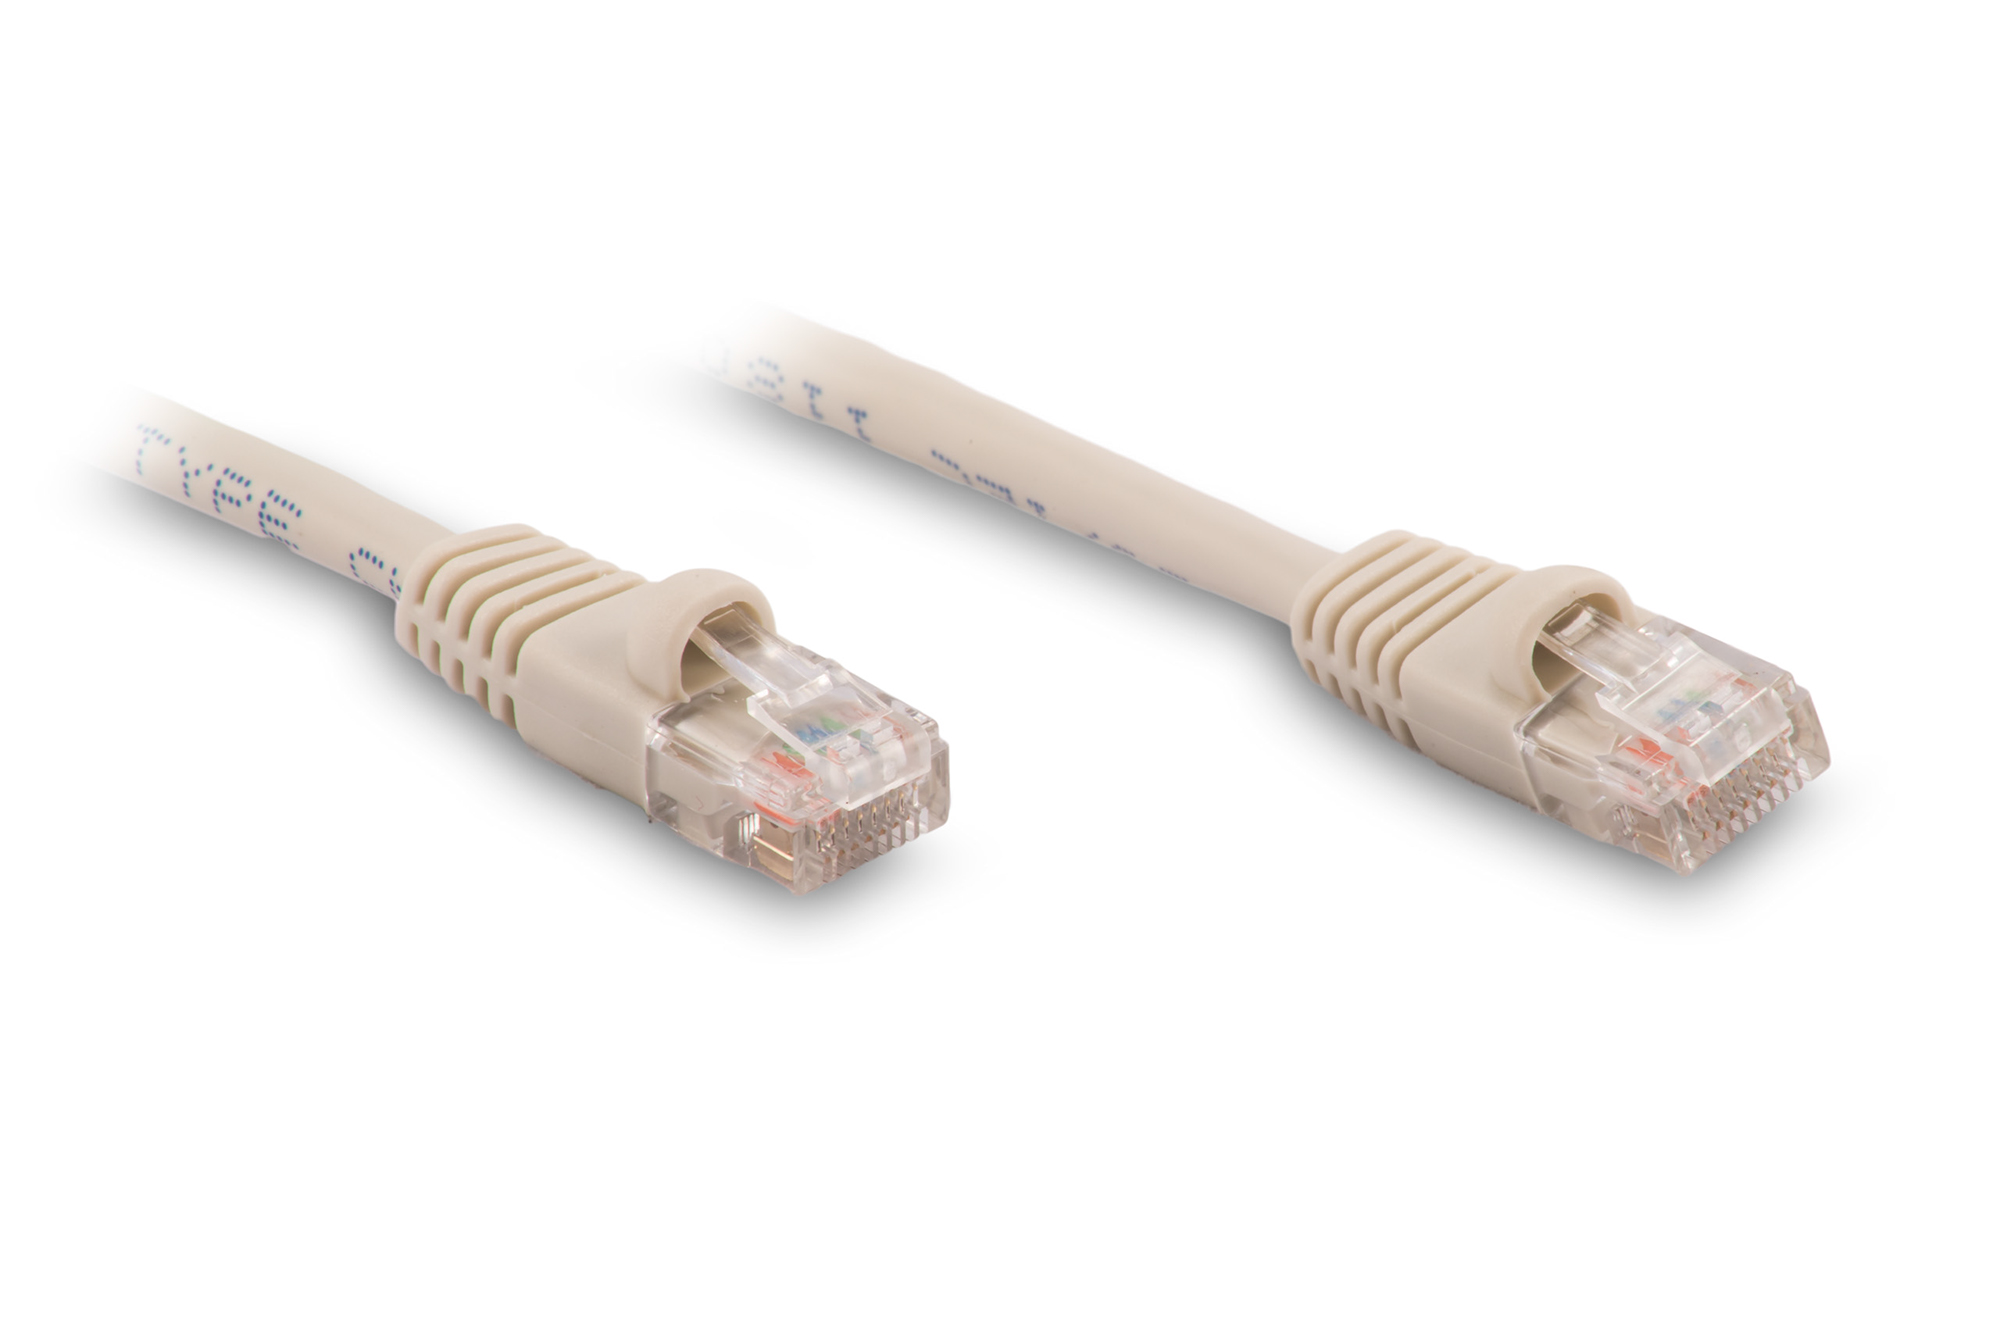 150ft Cat6 Ethernet Patch Cable - Gray Color - Snagless Boot